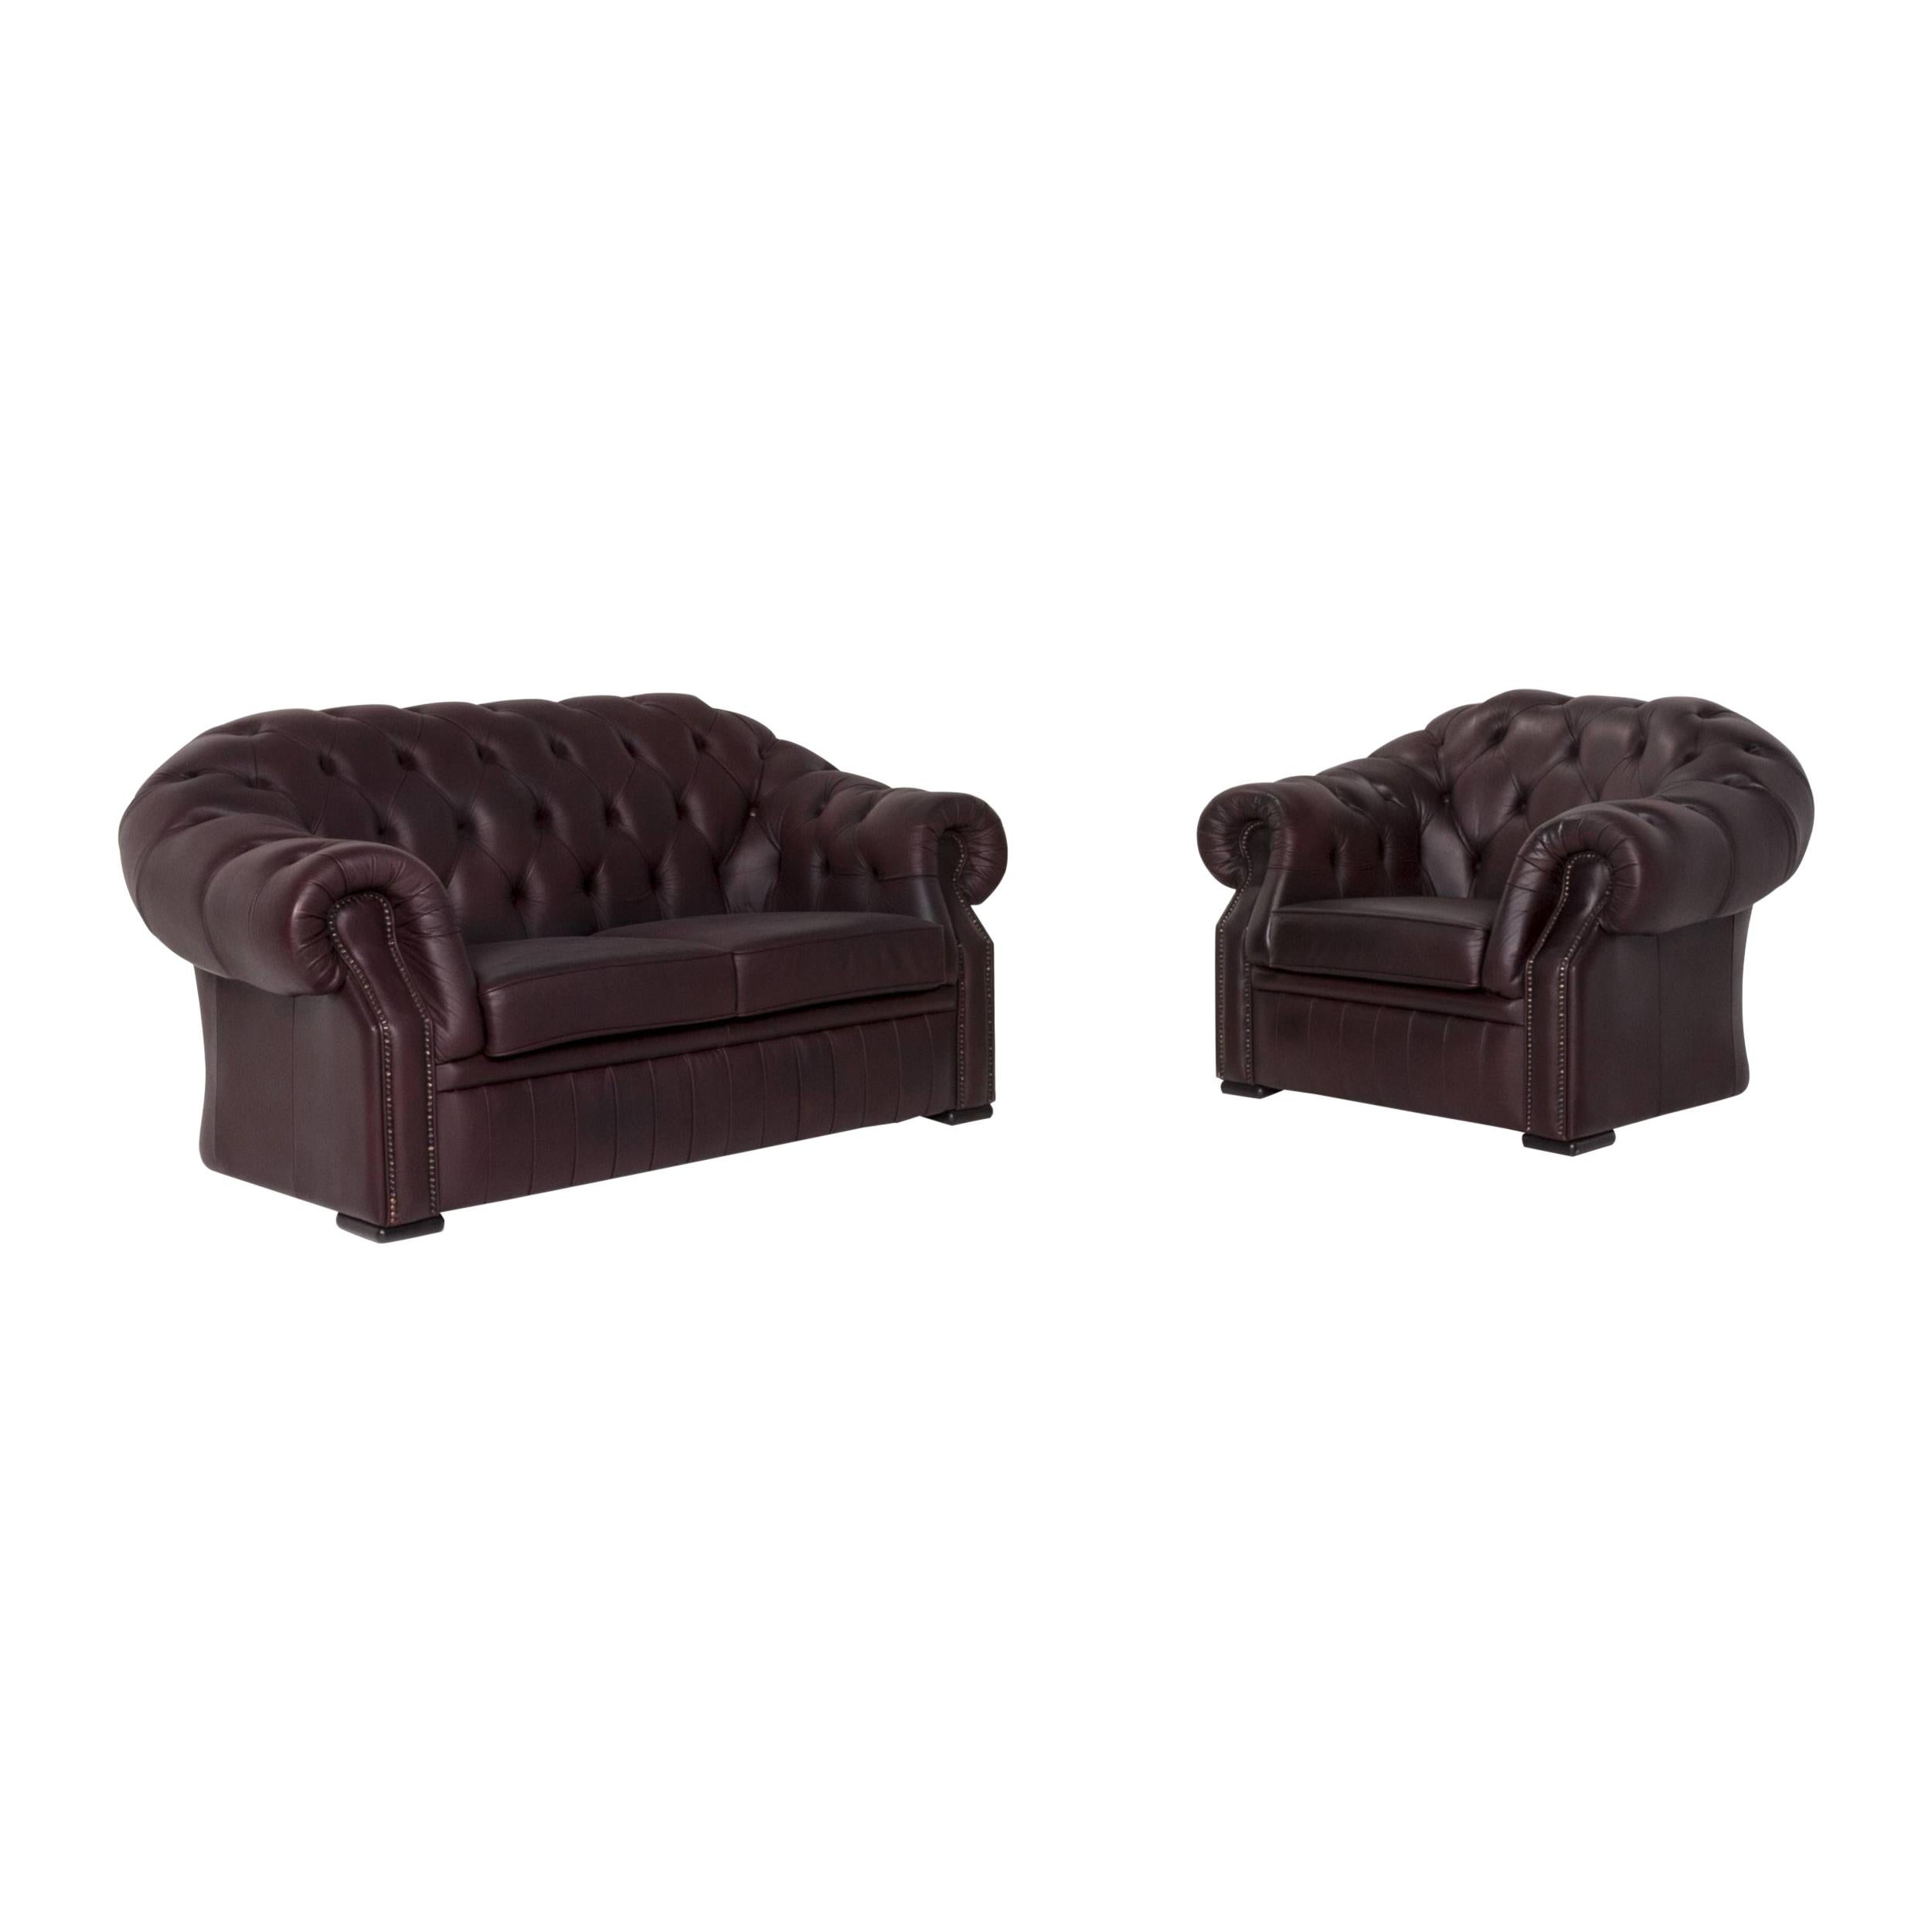 Chesterfield Leather Sofa Set Brown Violet 1 Two-Seat 1 Armchair Retro For Sale